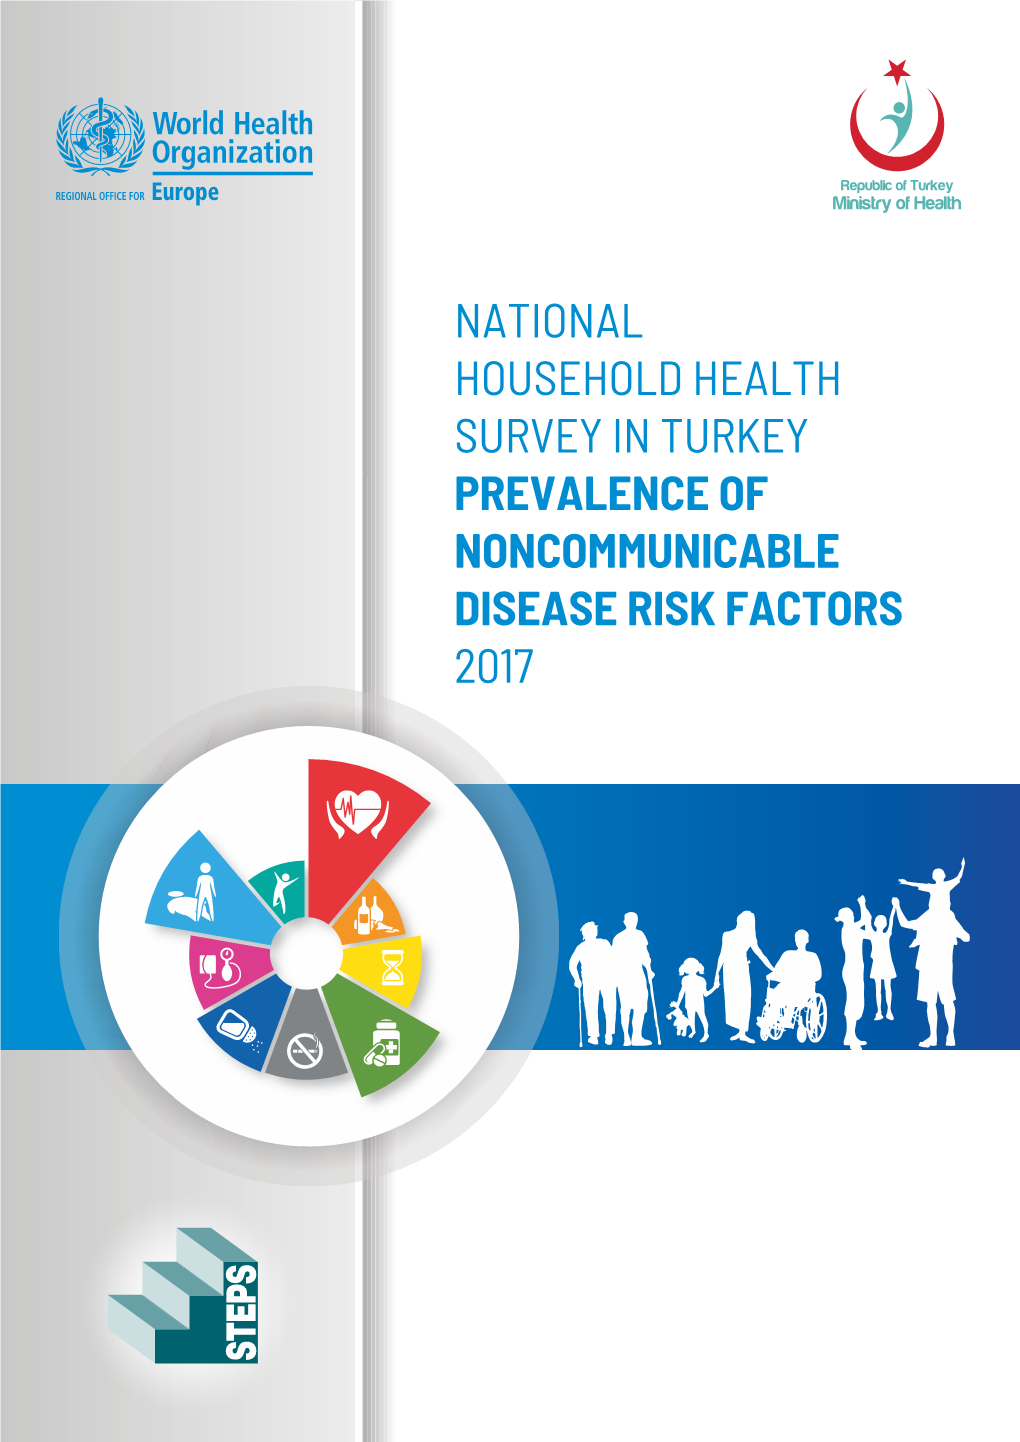 National Household Health Survey in Turkey Prevalence of Noncommunicable Disease Risk Factors 2017